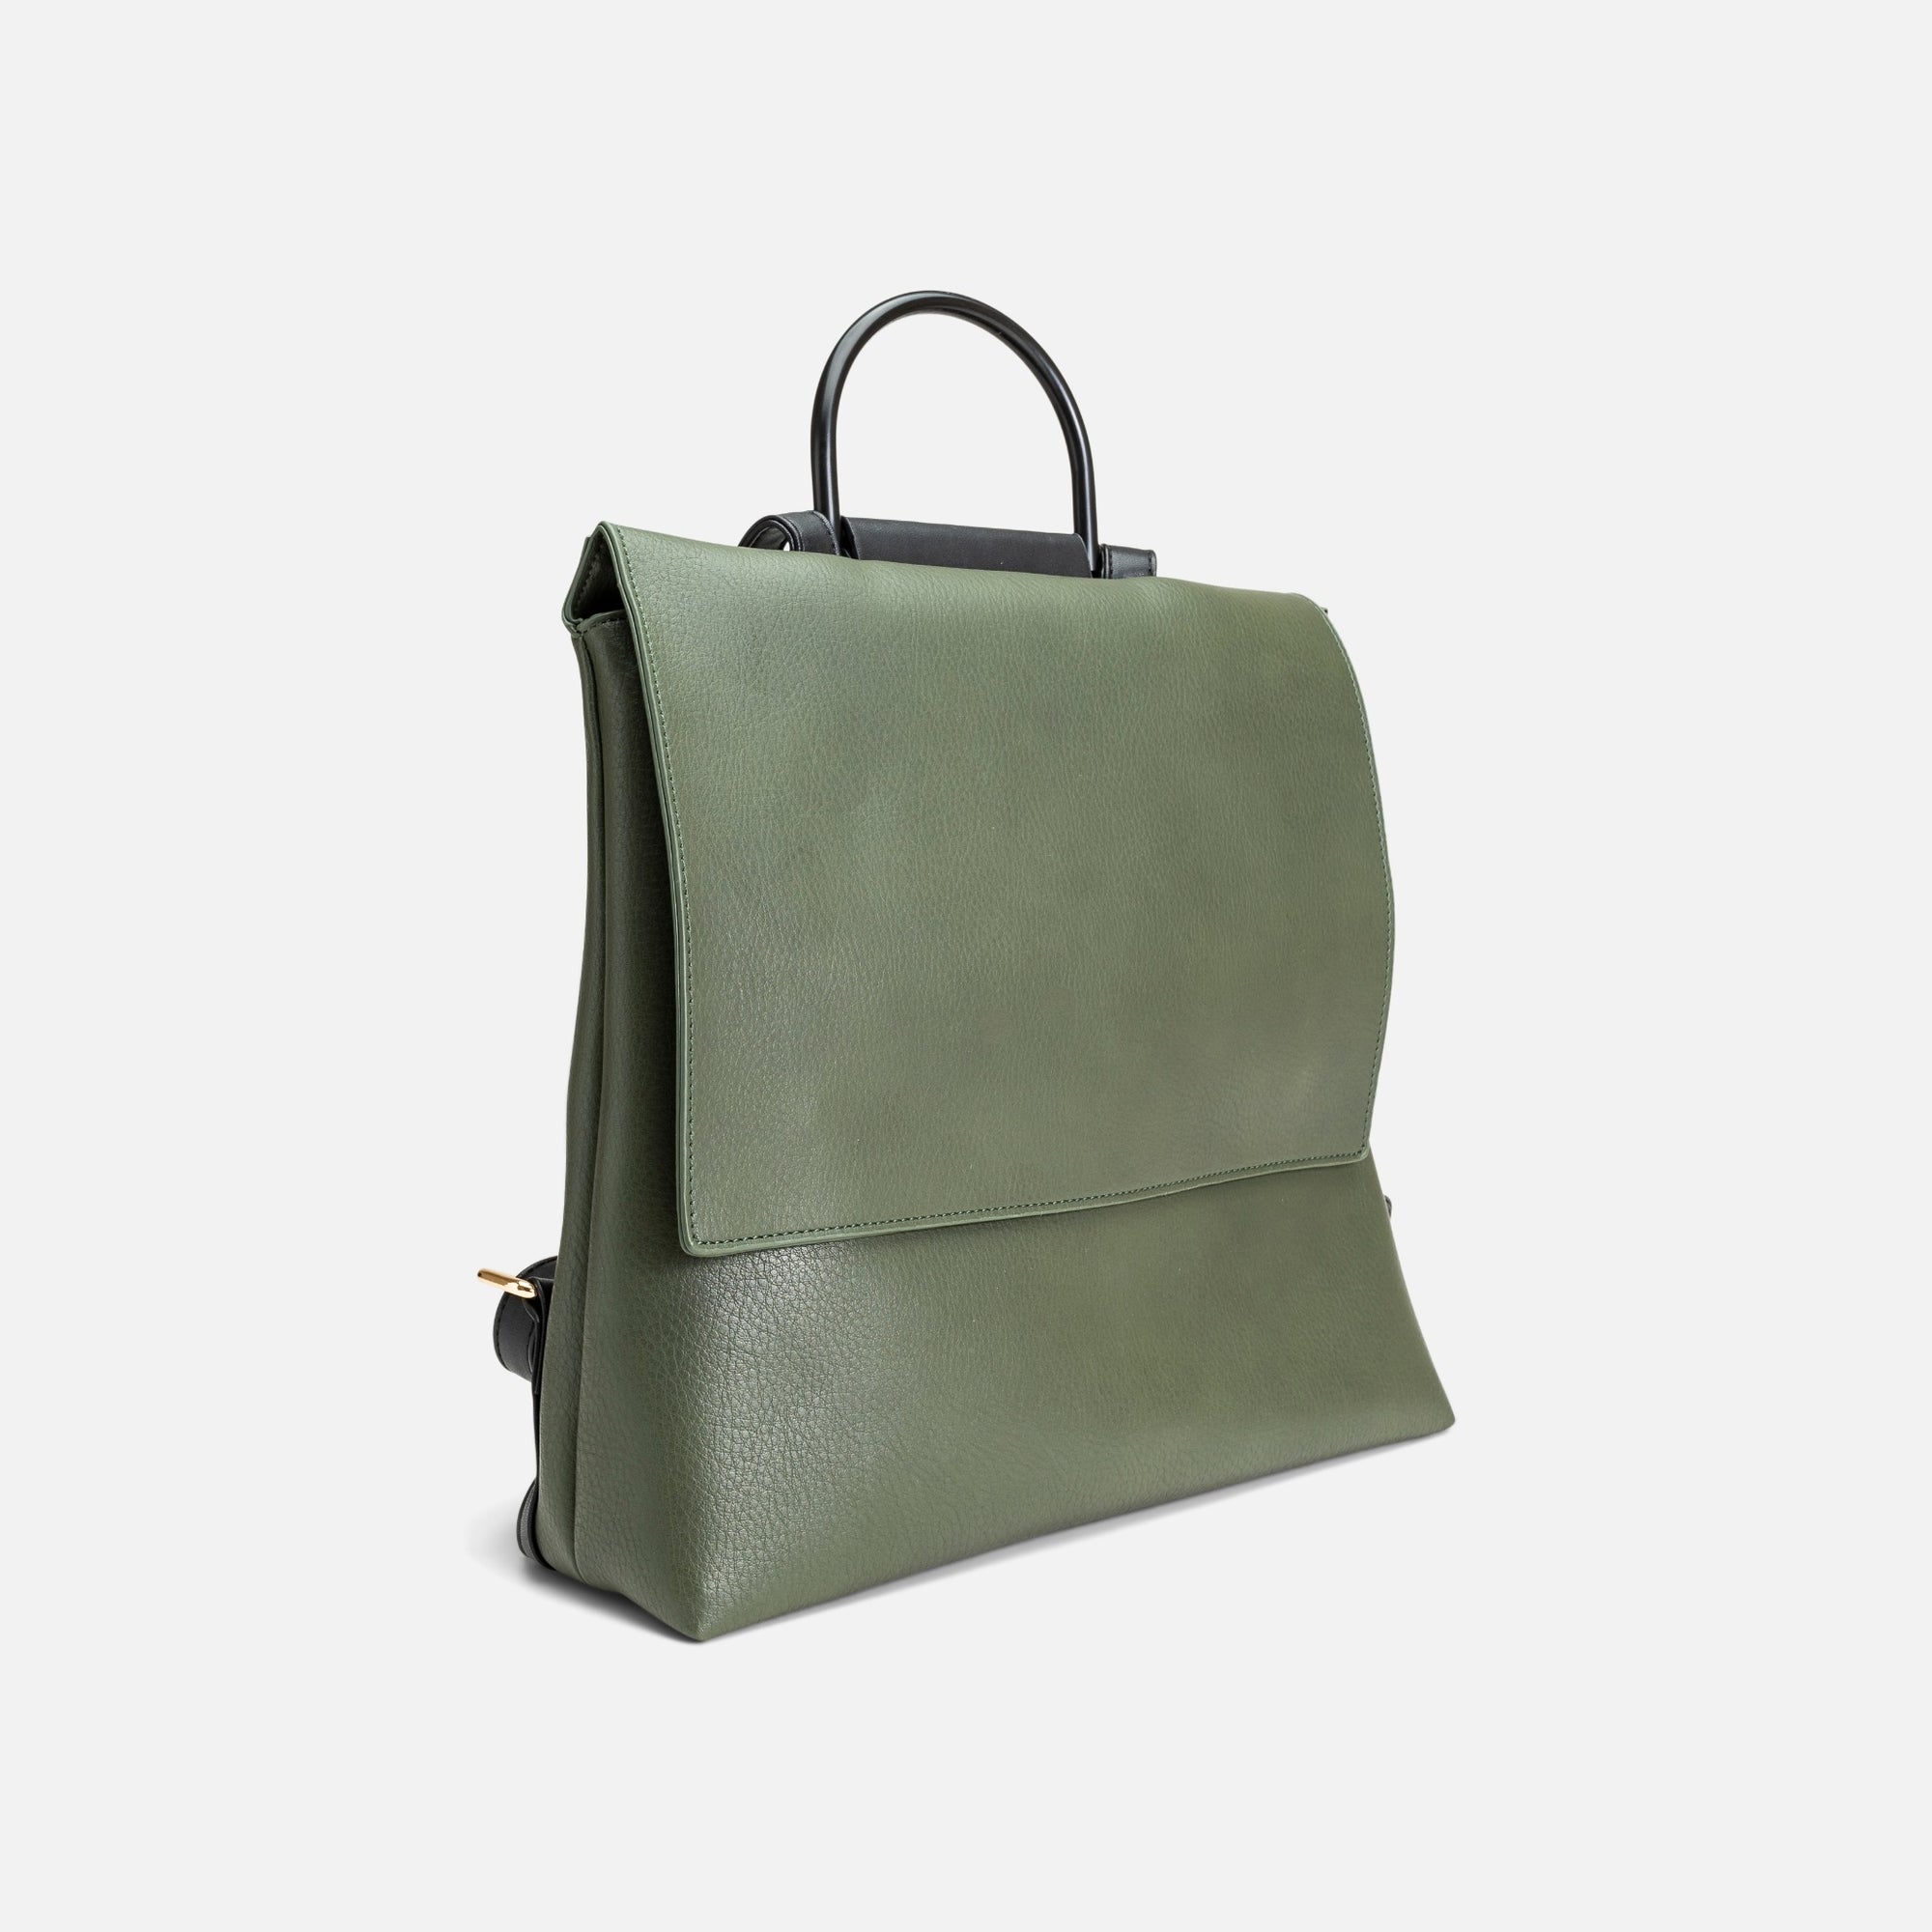 Dark green backpack with large flap and black handle